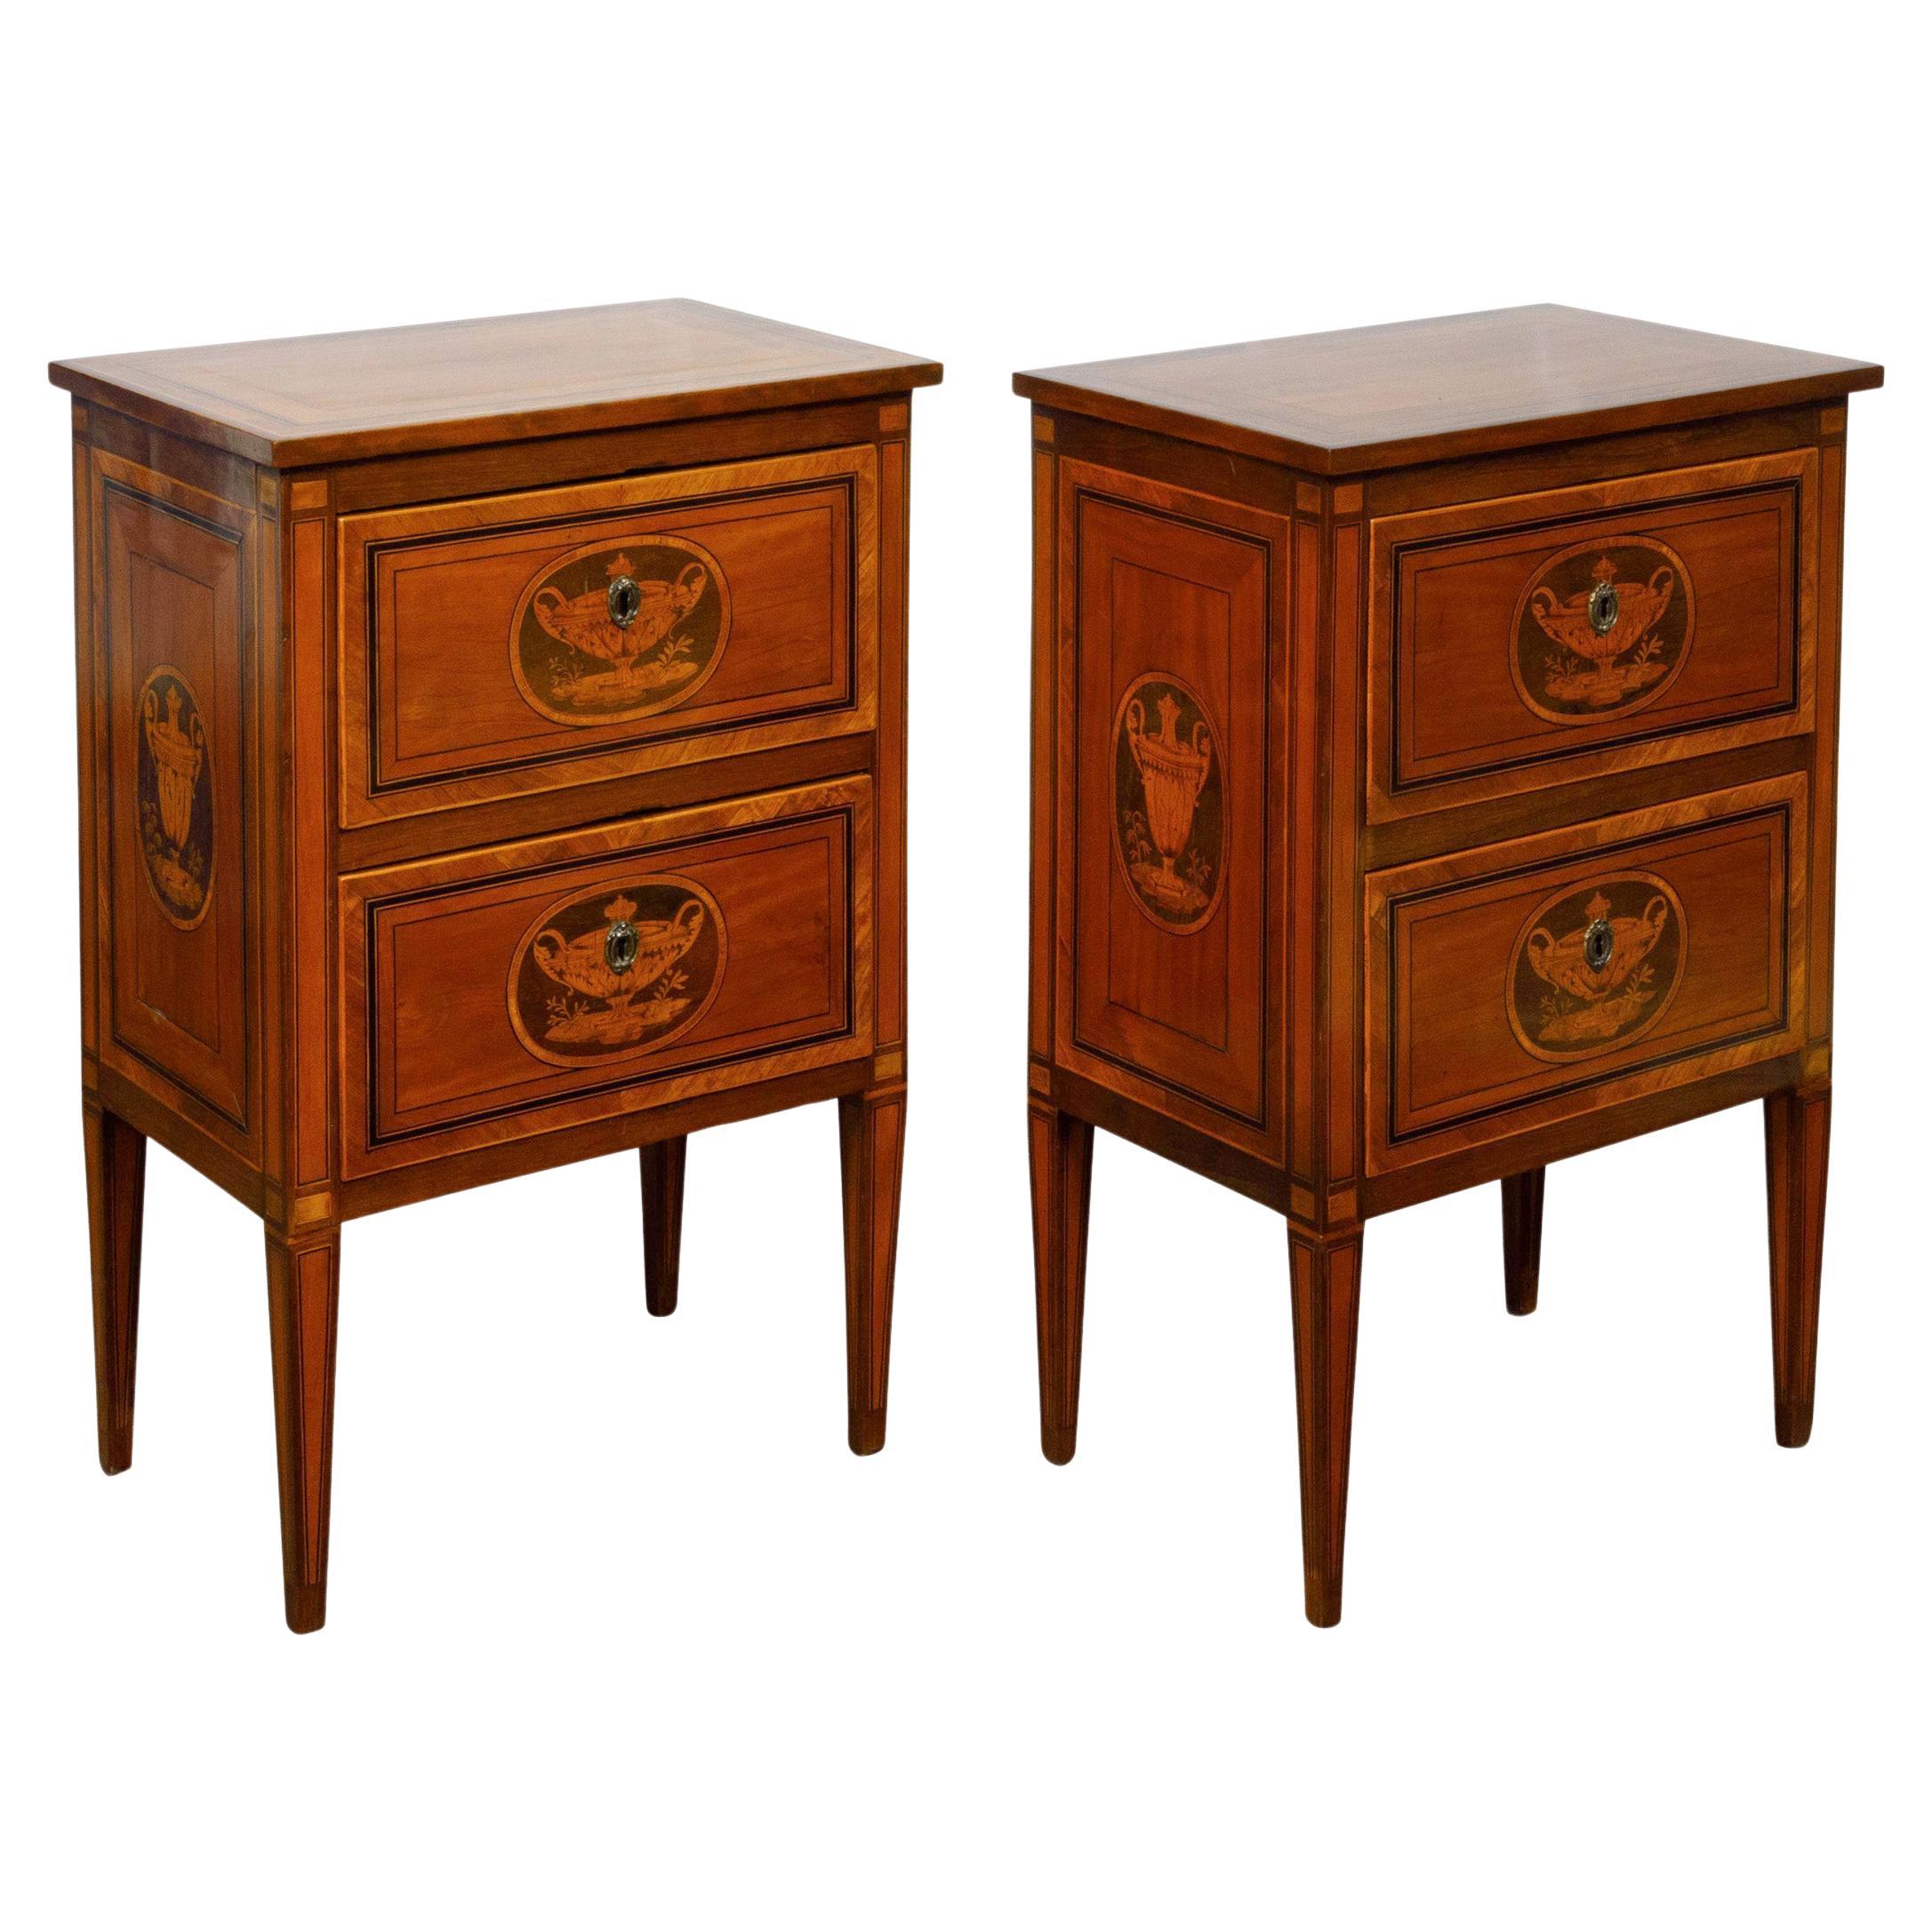 Pair of Italian Neoclassical 1800s Walnut Bedside Tables with Marquetry Décor For Sale